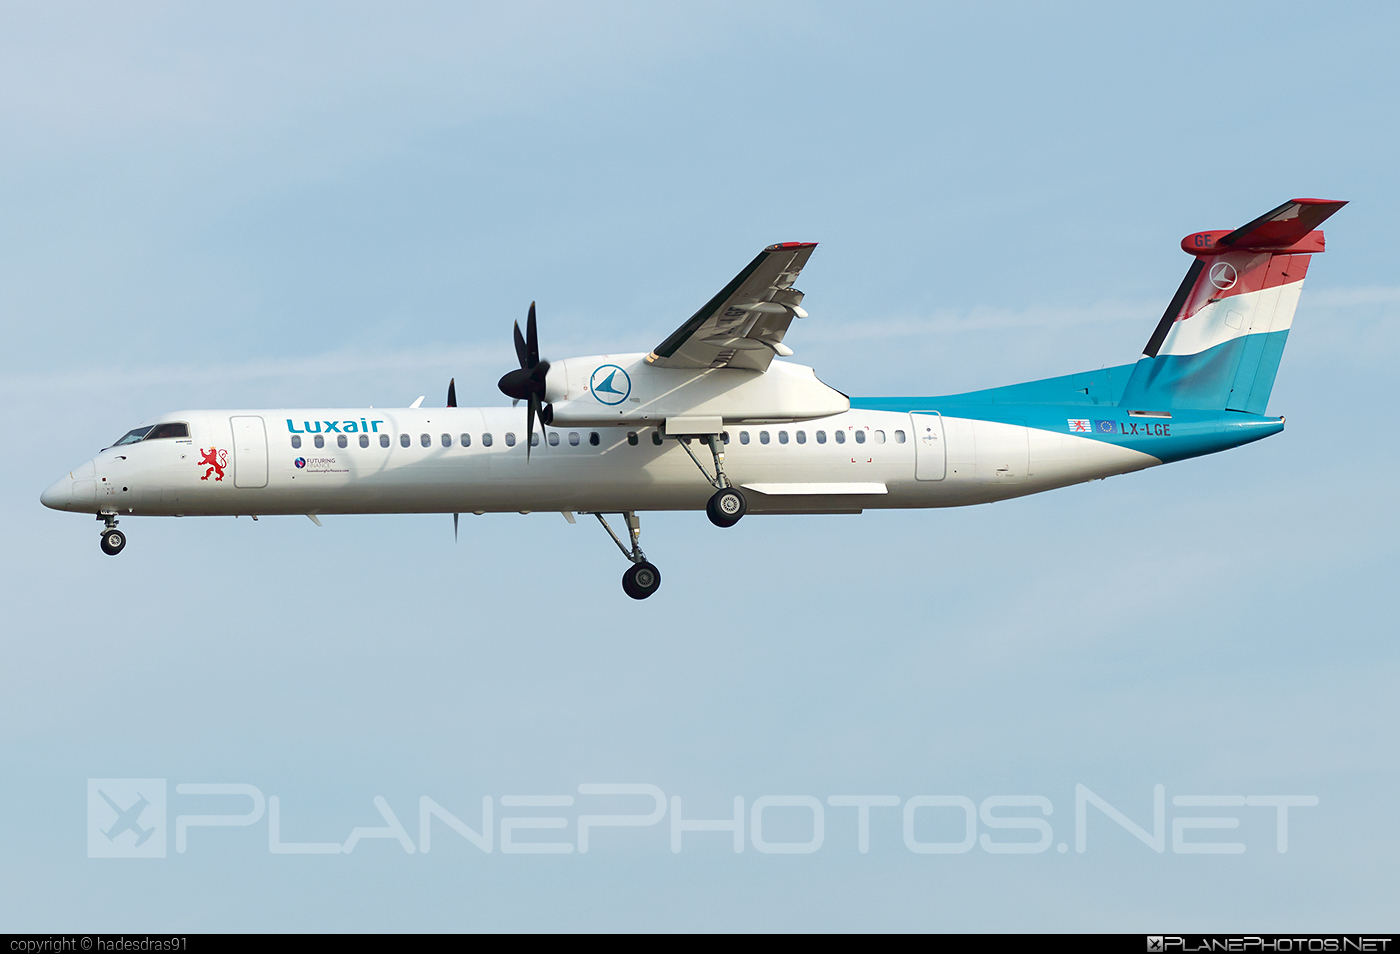 Bombardier DHC-8-Q402 Dash 8 - LX-LGE operated by Luxair #bombardier #dash8 #dhc8 #dhc8q402 #luxair